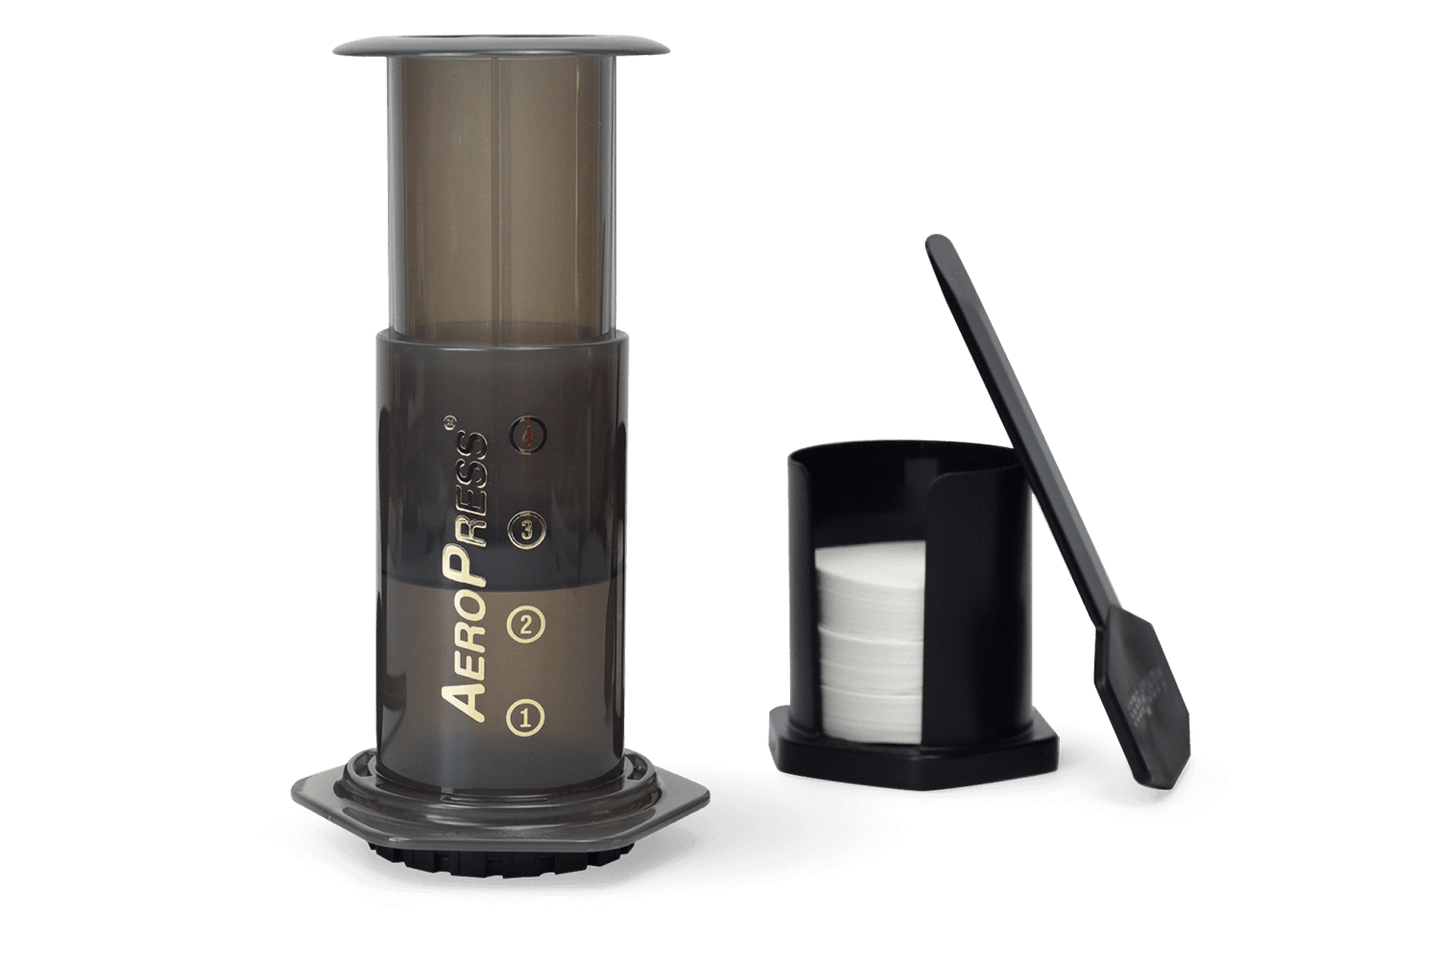 Aeropress brewer with filter papers